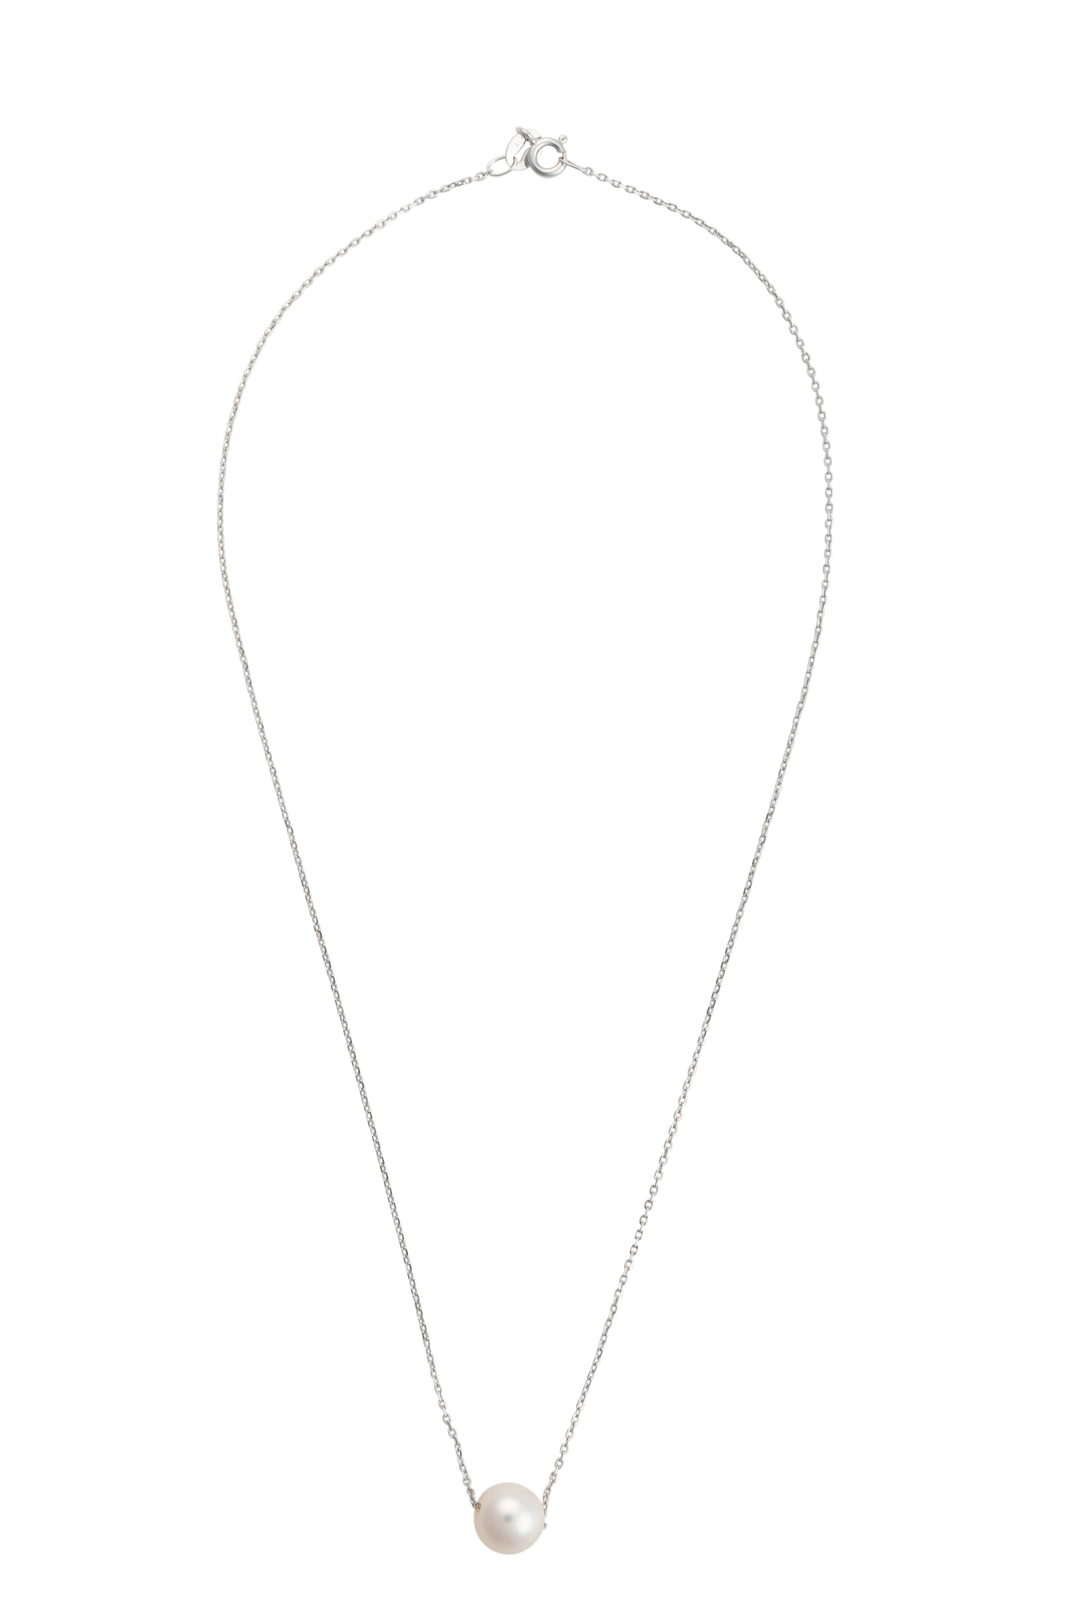 Signature Floating Pearl Necklace | Dog House Pearls